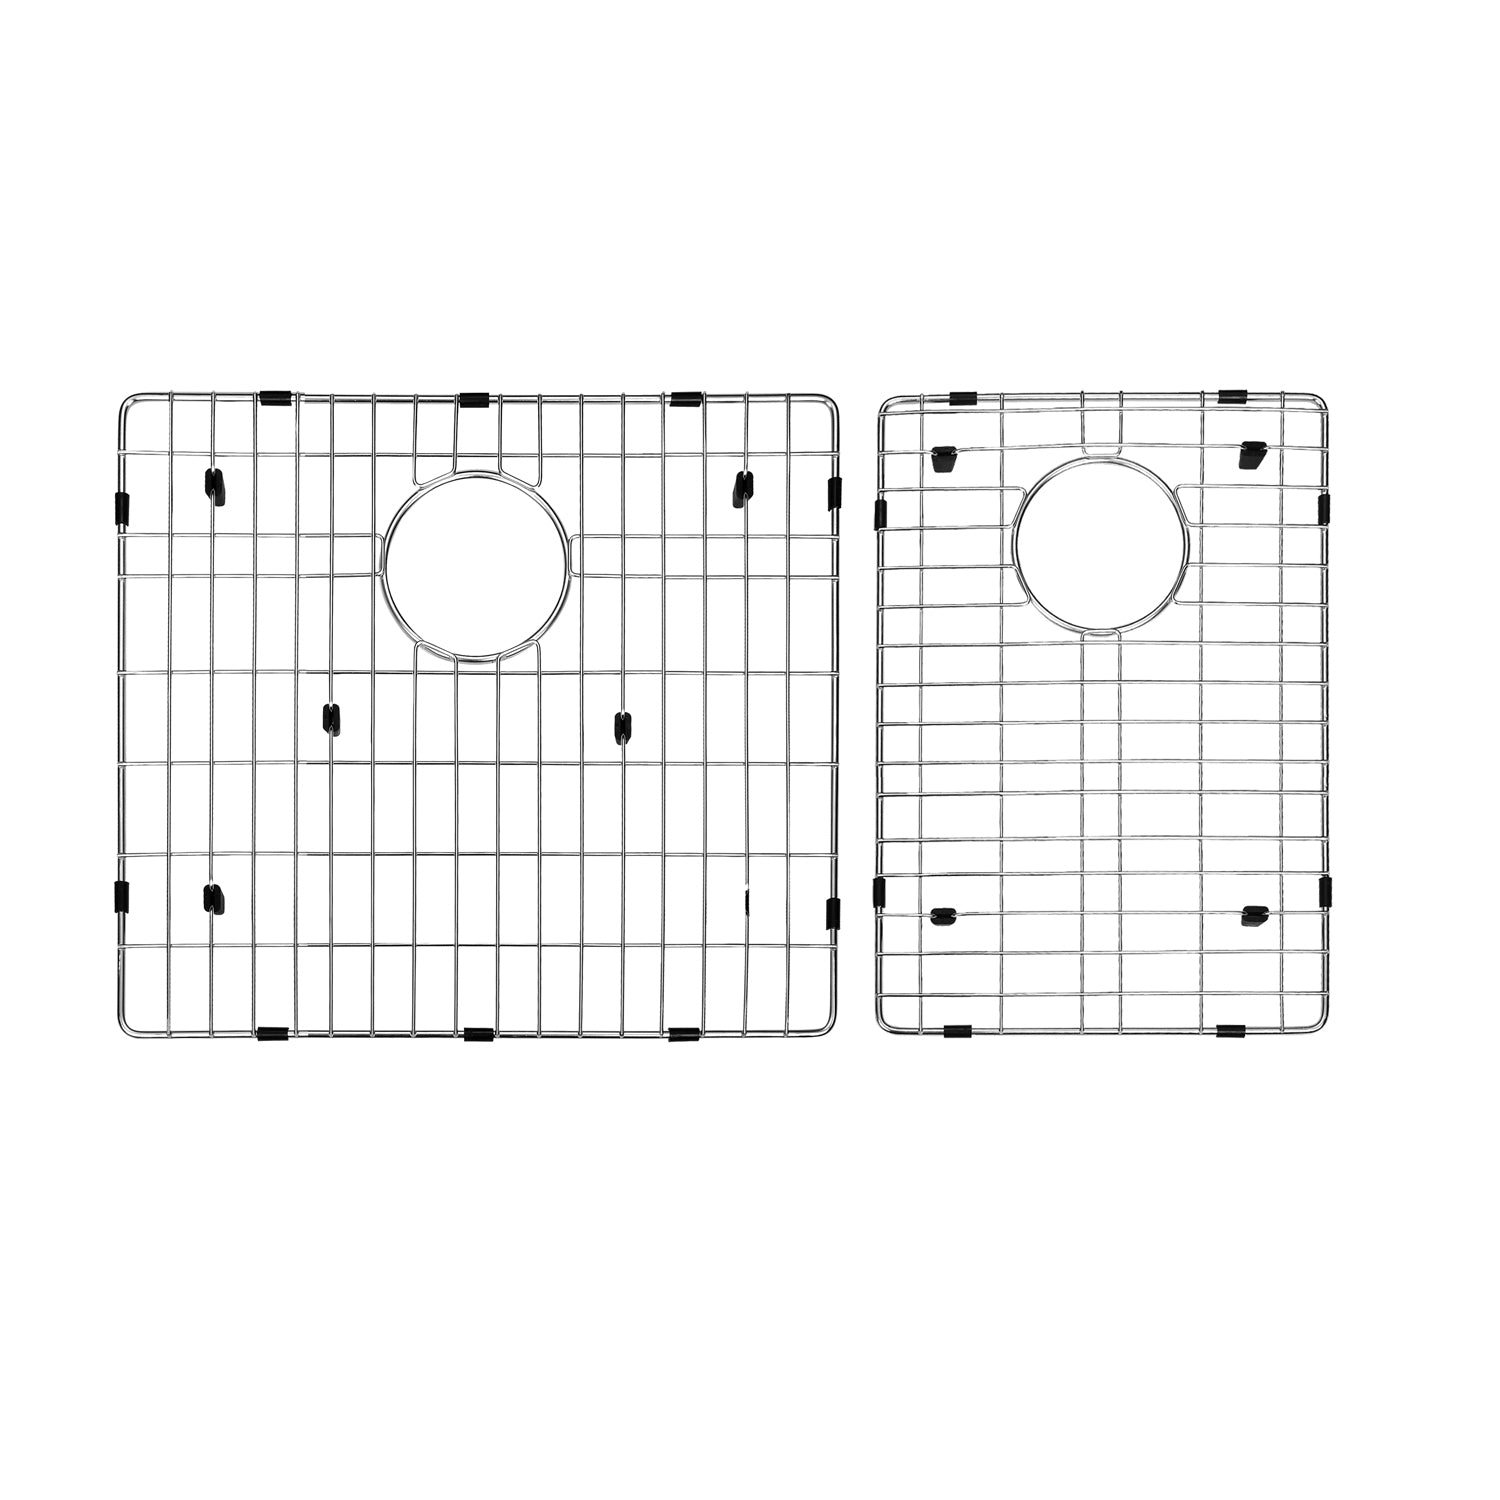 DAX Grid for Kitchen Sink, Stainless Steel Body, Chrome Finish, Compatible with DAX-SQ-2920, 17-1/2 x 14-3/4 Inches (GRID-SQ2920)